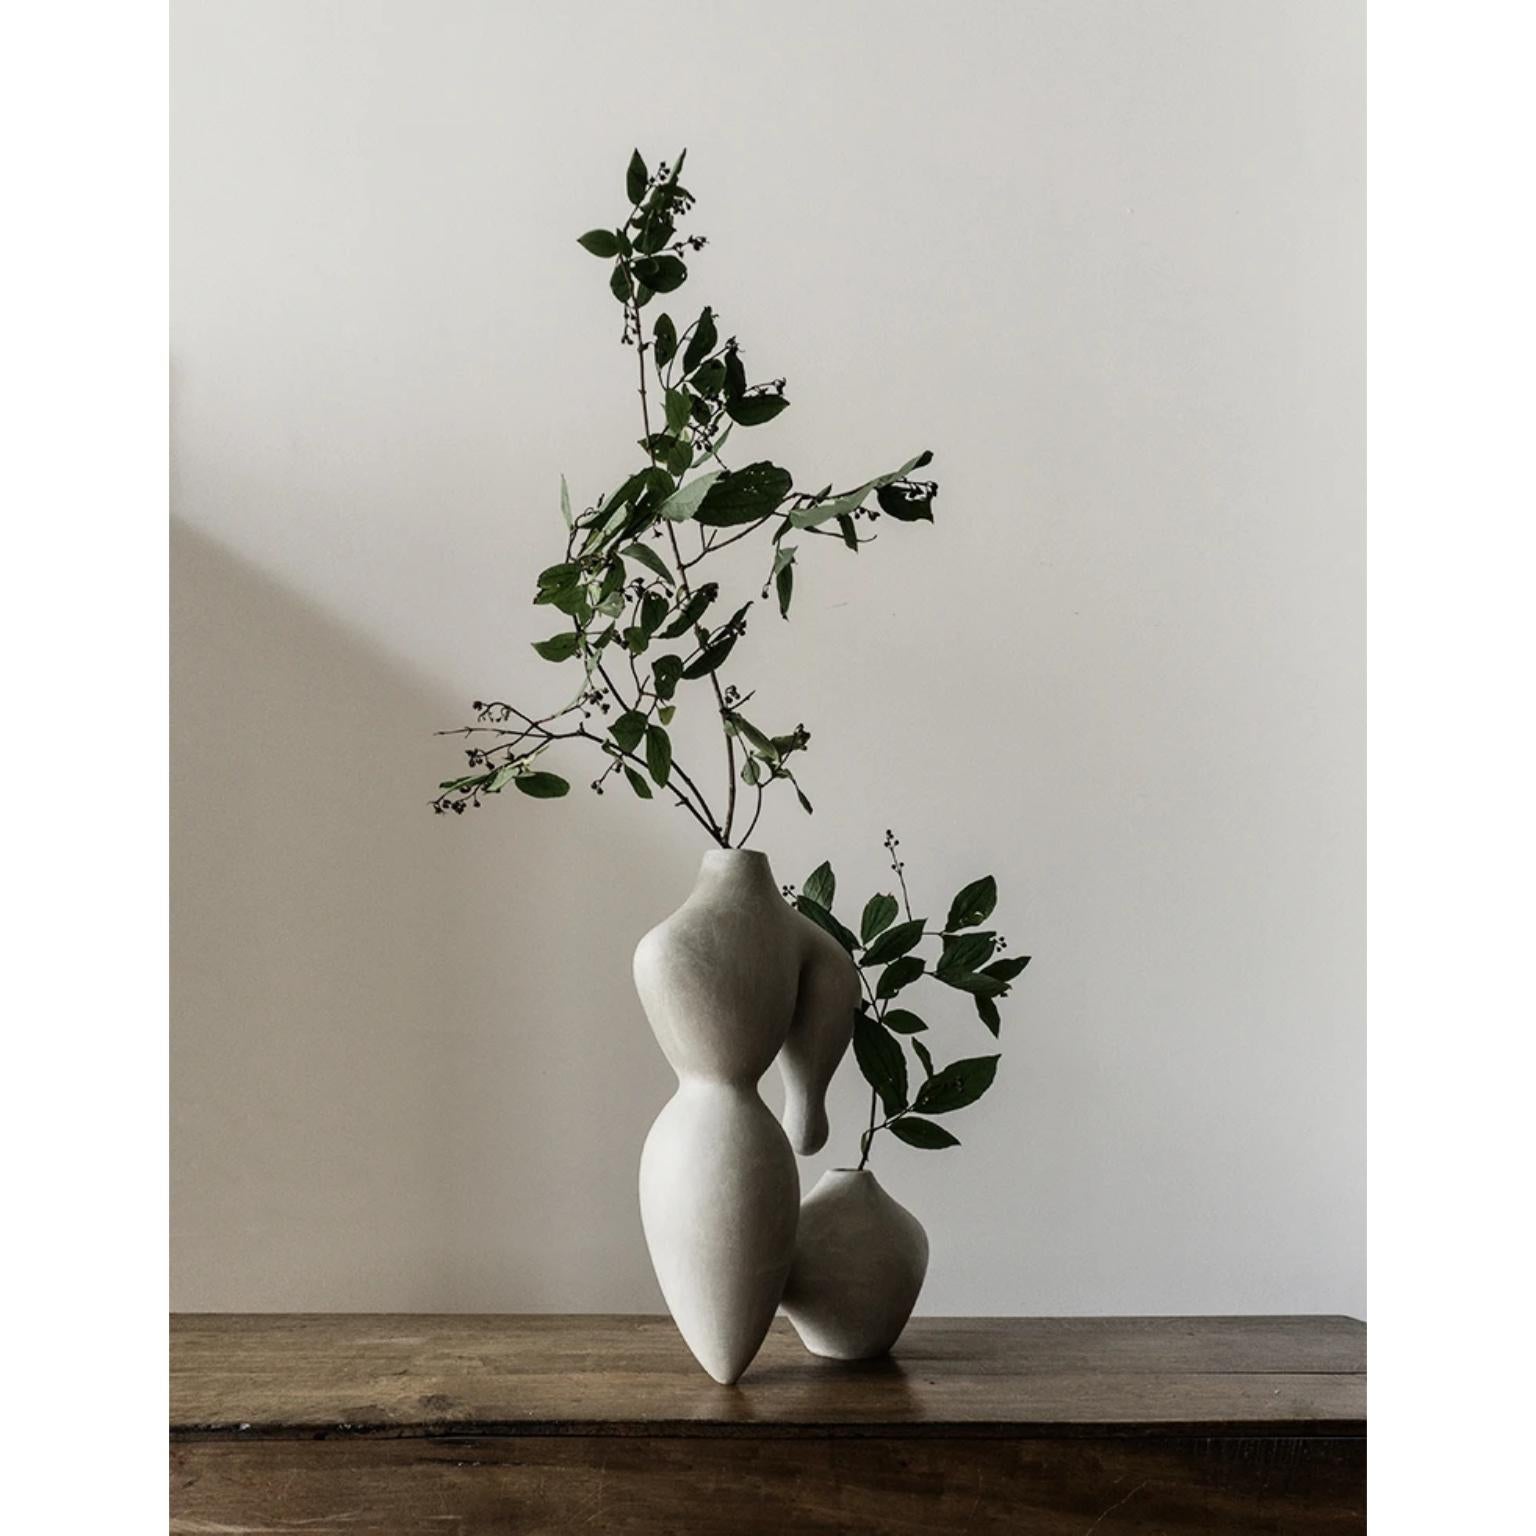 Thesium vase by cosmin florea.
Unique piece.
Dimensions: W 40 x D 15 x H 50 cm.
Materials: Stoneware.

Inspired by my love for pristine nature, this sculptural vase channels the shape of a dove.
Handcrafted in white stoneware, the Dove vase